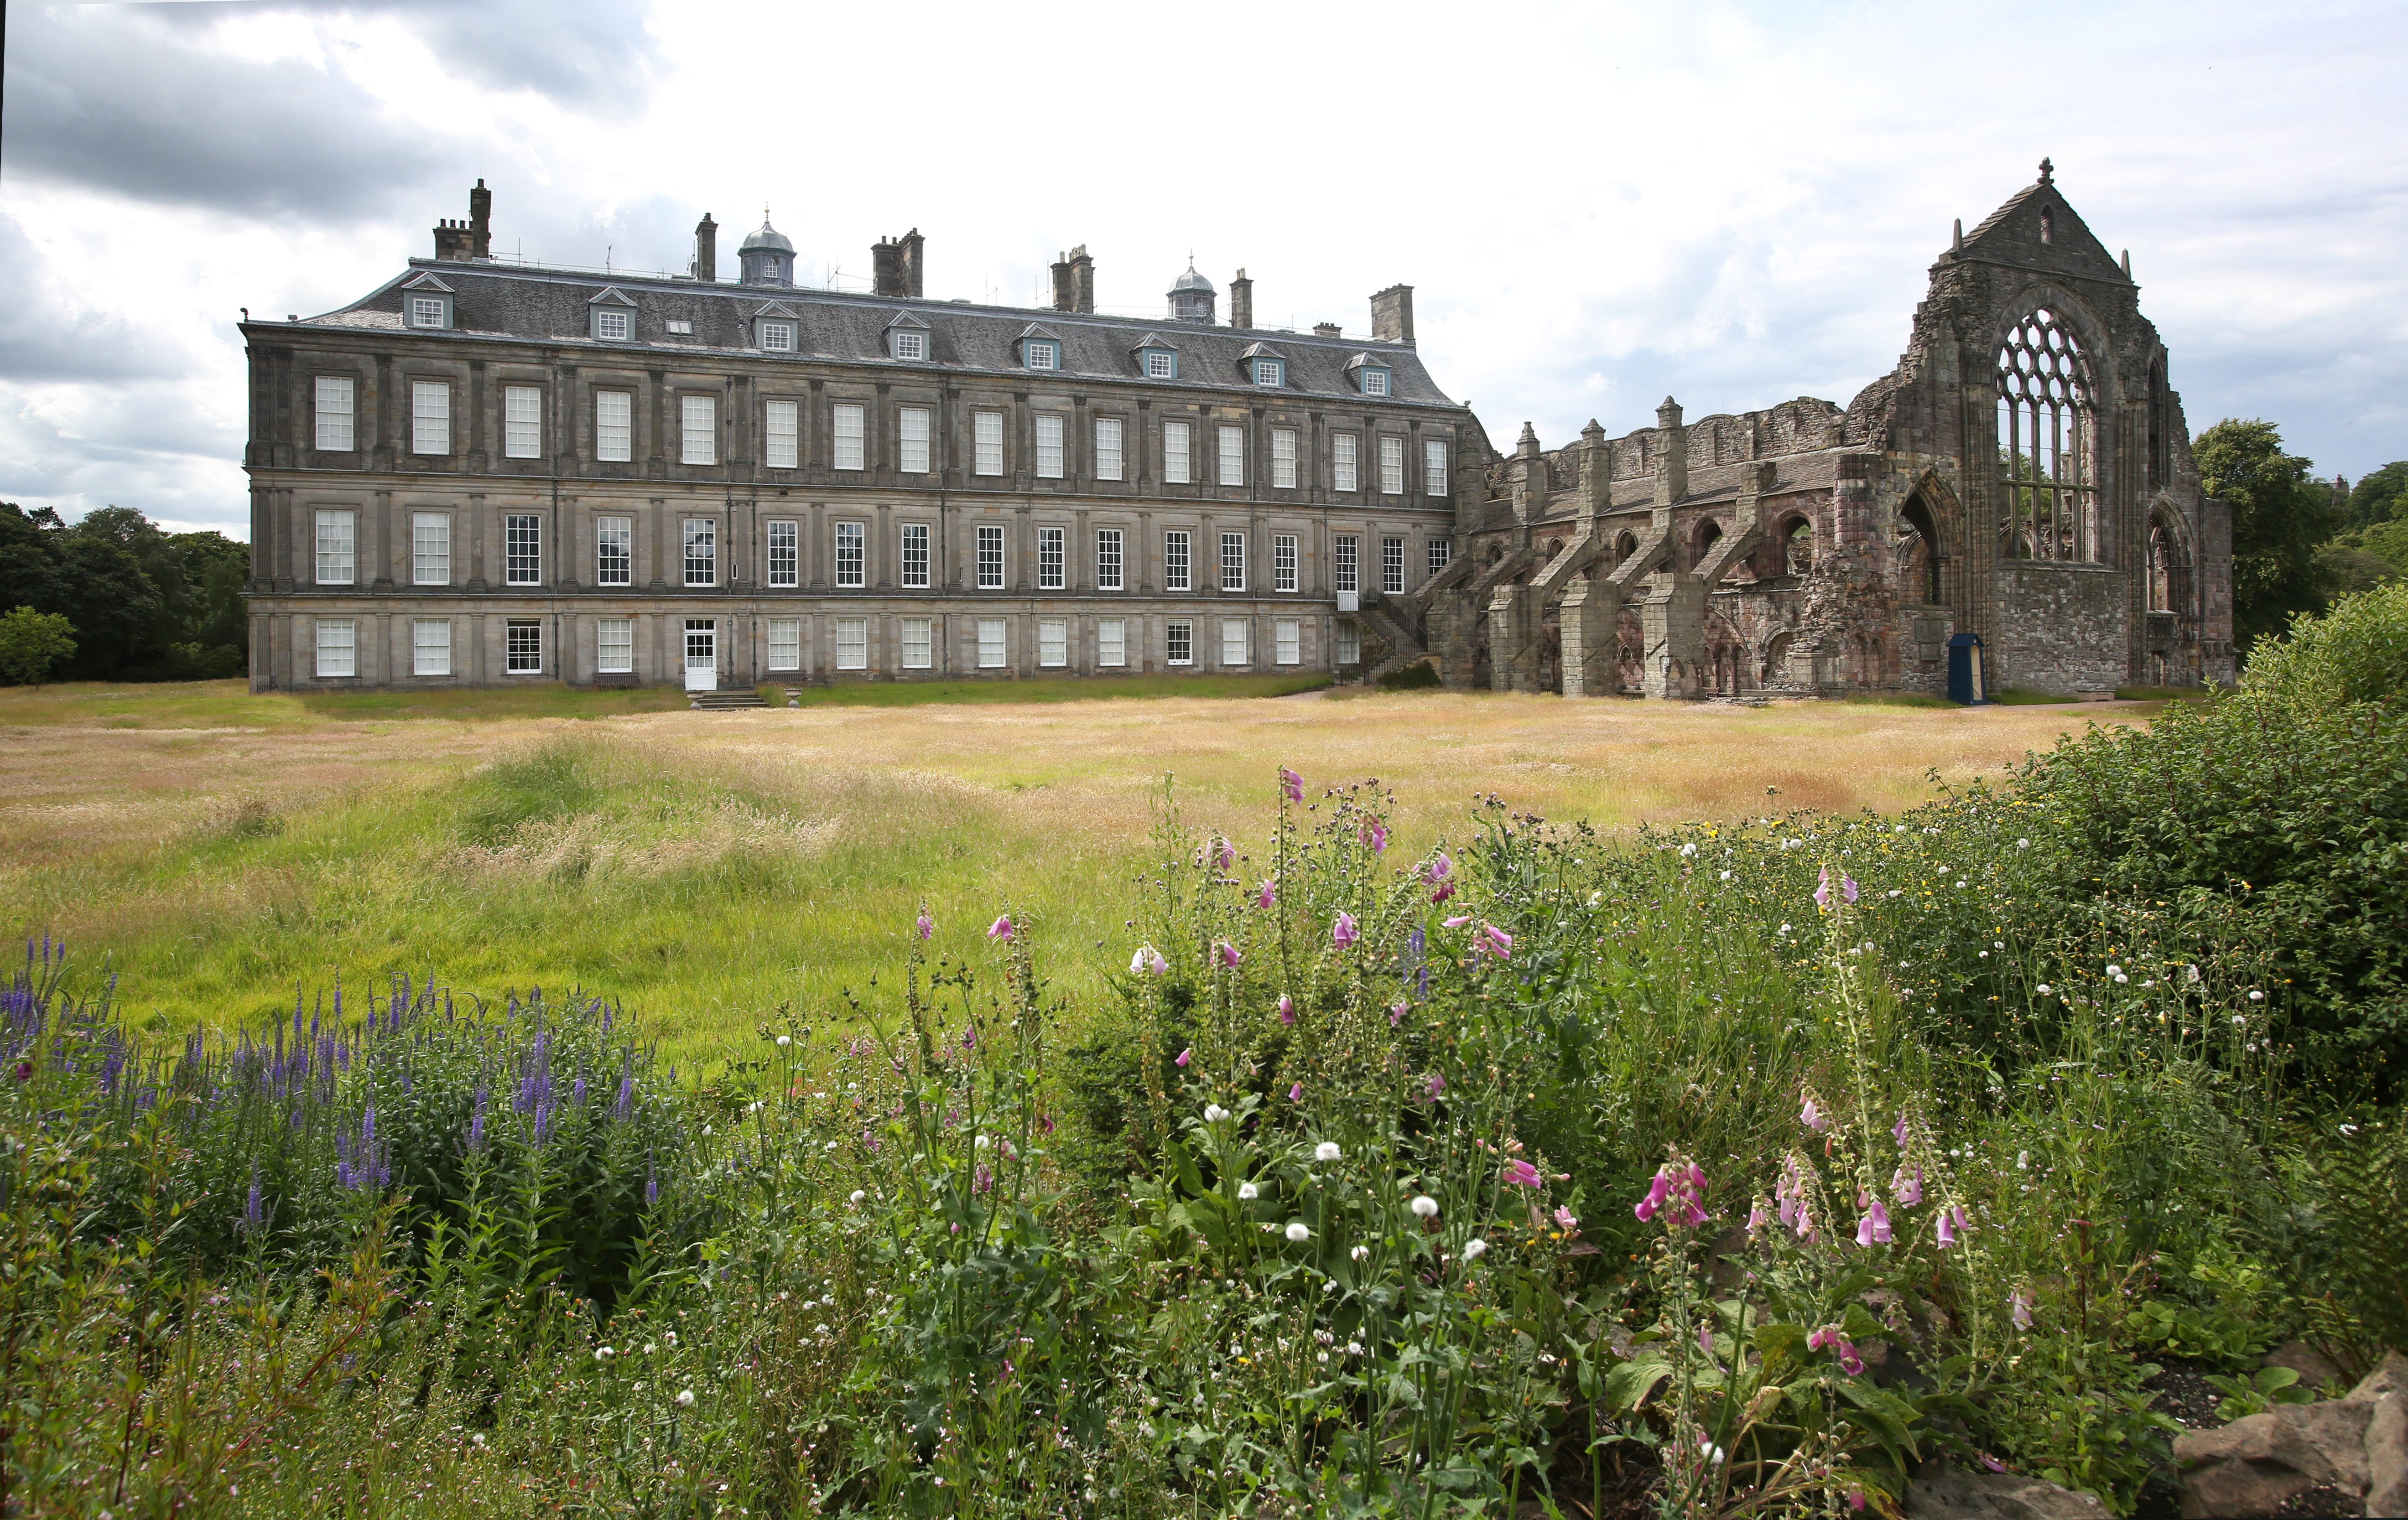 The Palace of Holyroodhouse garden